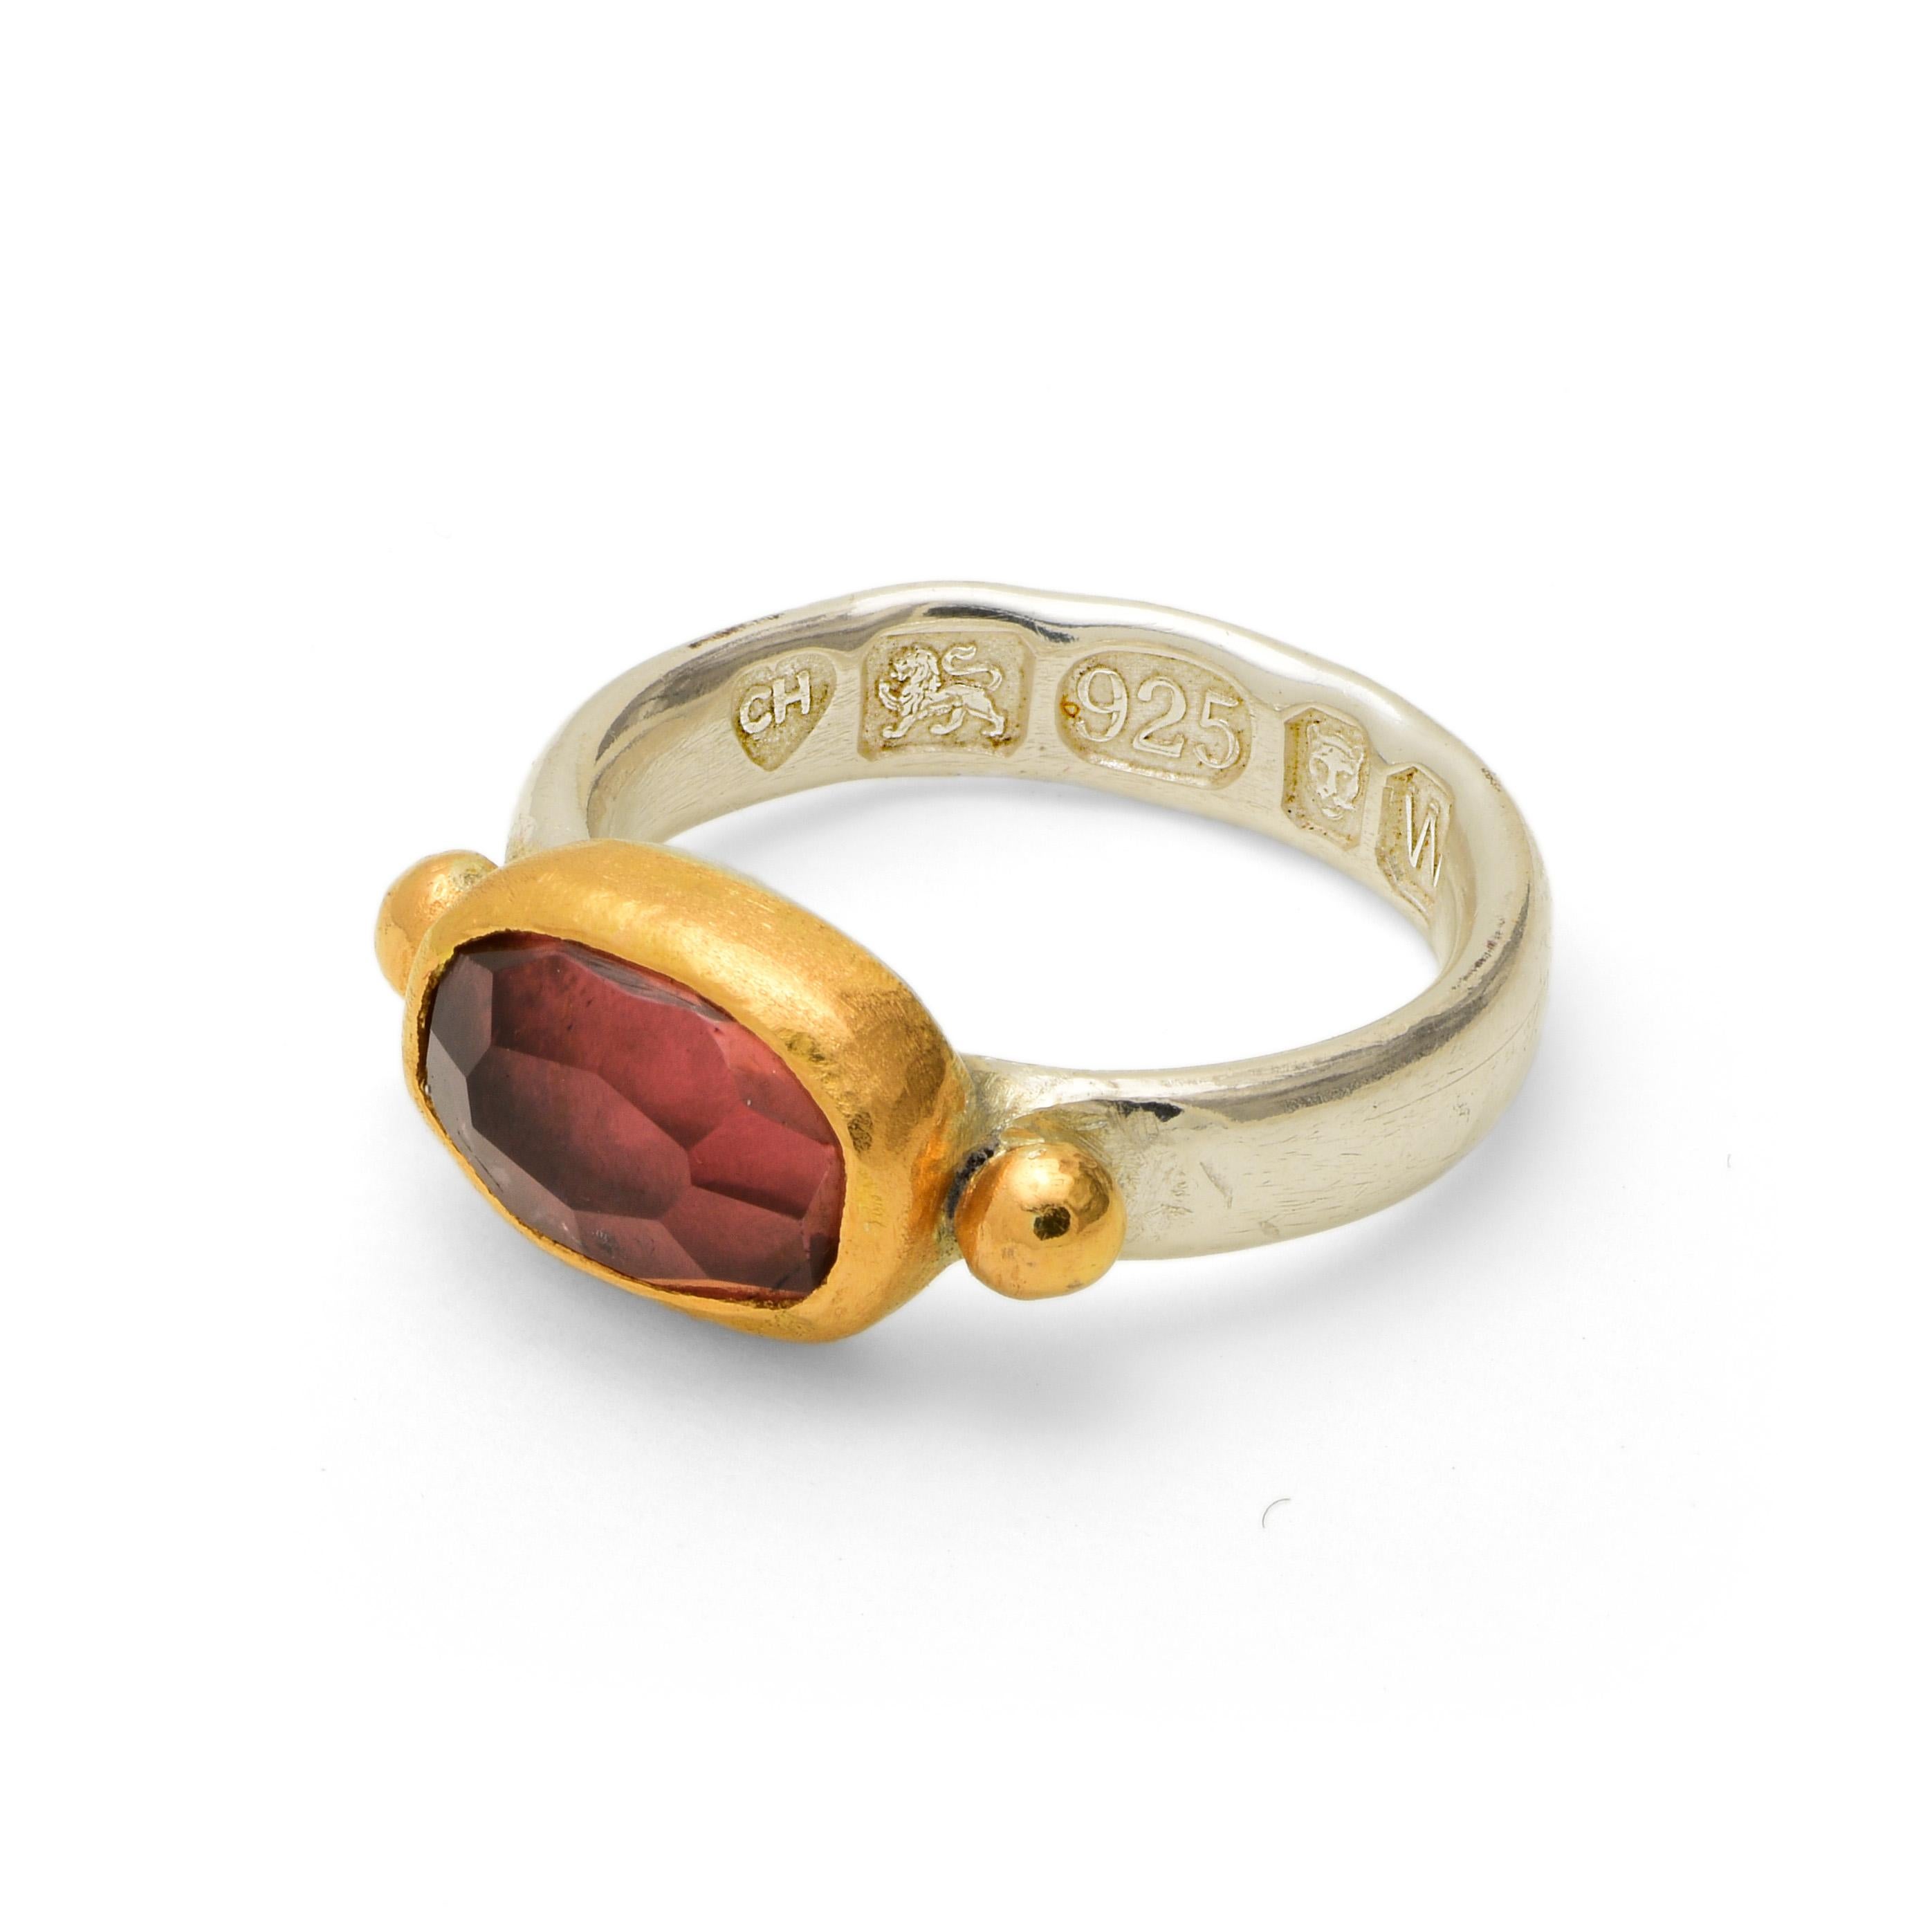 A ring with 22 karat gold balls either side of this lovely faceted pink tourmaline stone. The stone's setting is also 22 karat gold and the band is made from thick sterling silver. There is a large, deep British hallmark on the inside of the